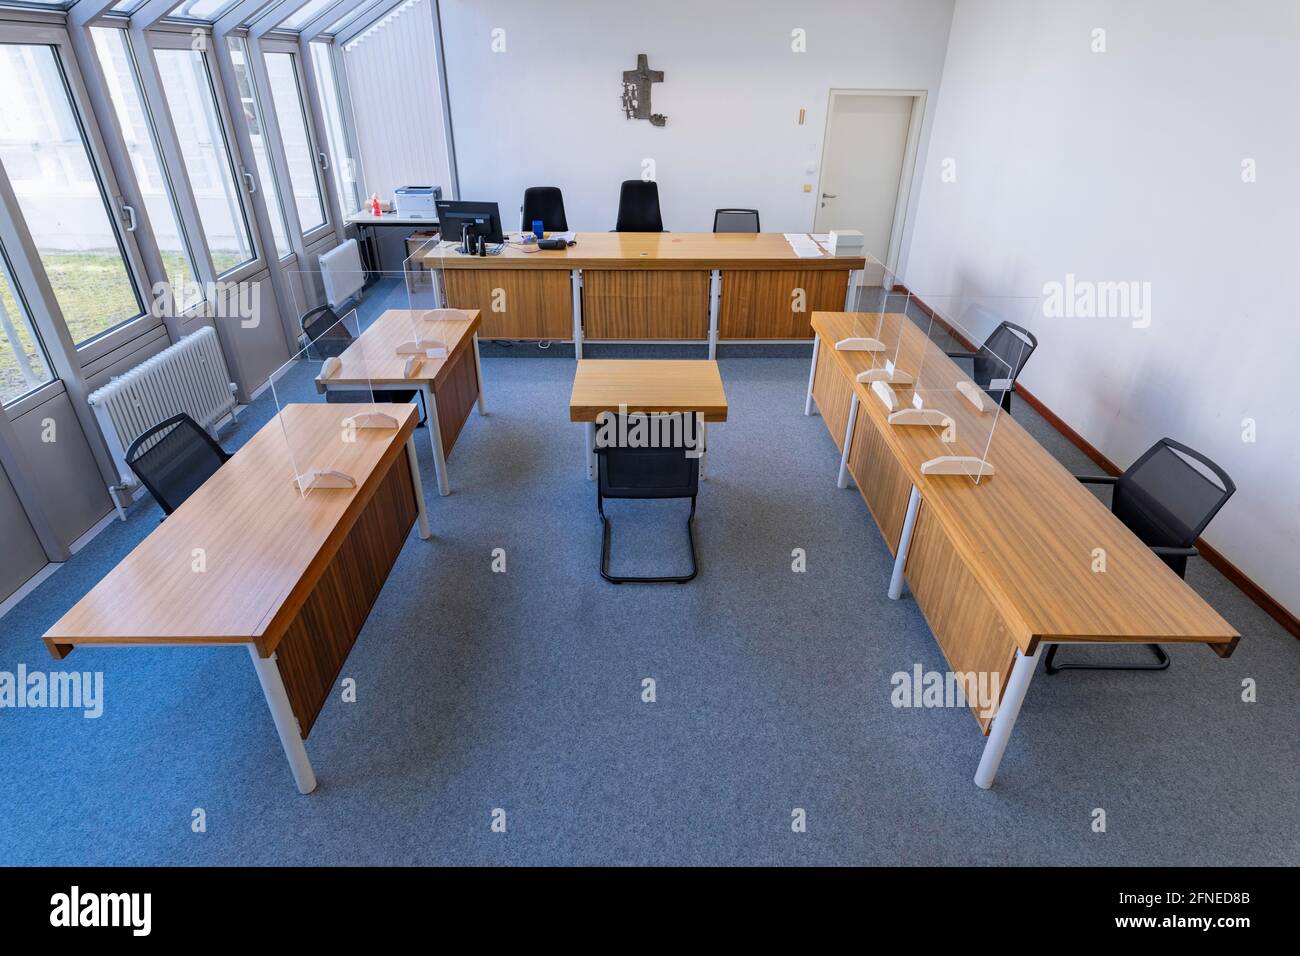 Courtroom 3 at the Erding Local Court, Bavaria, Germany Stock Photo